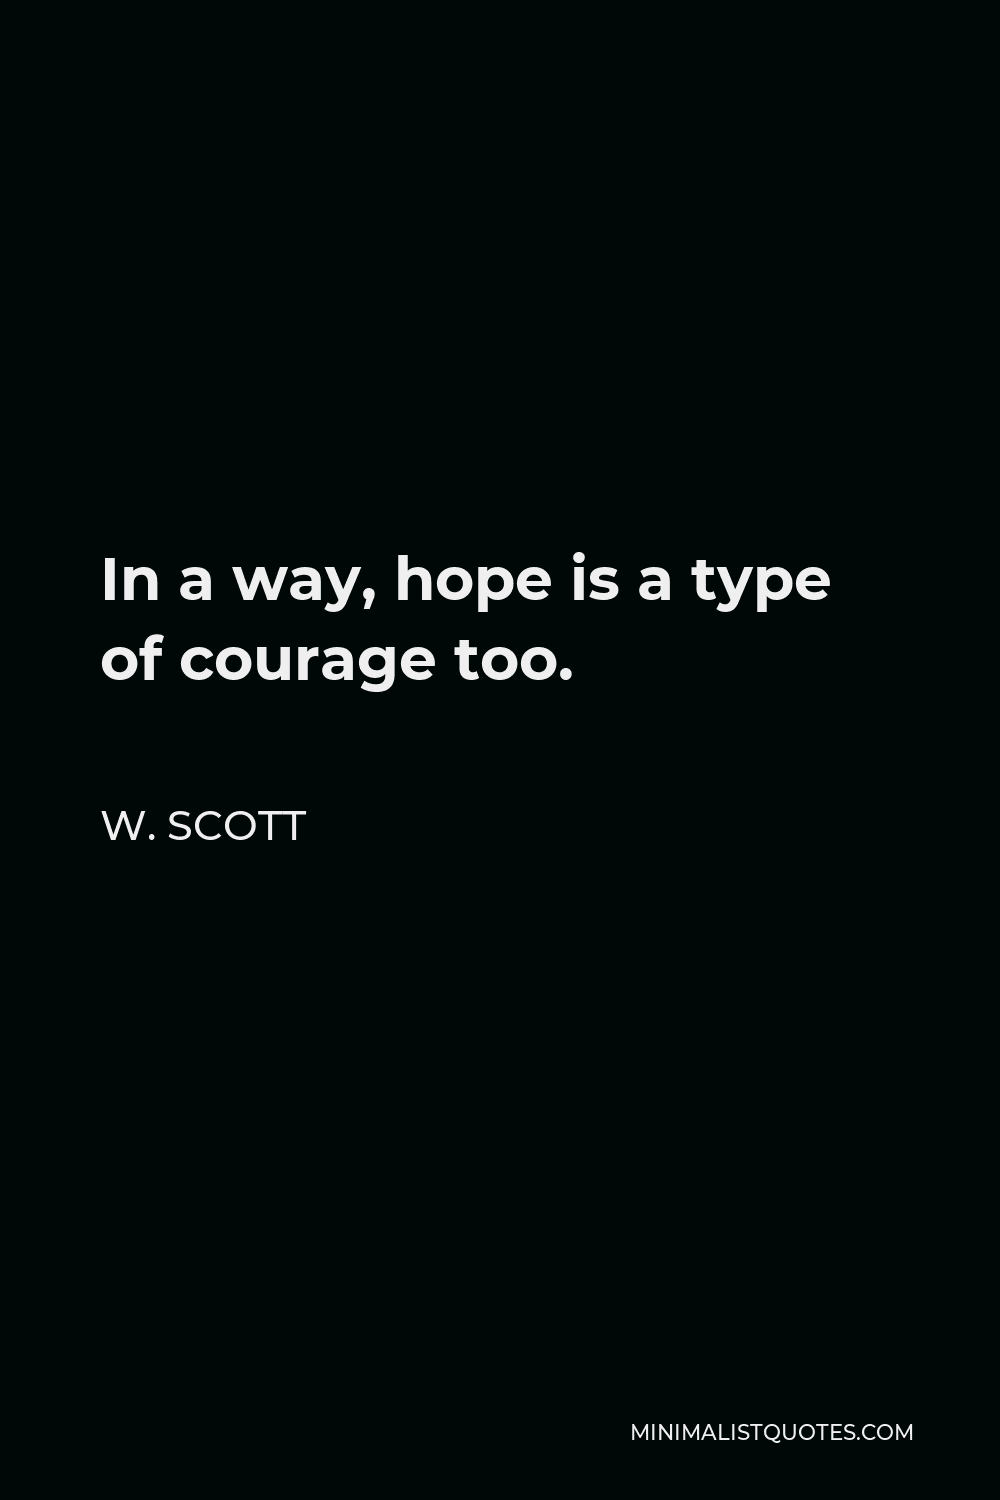 W. Scott Quote - In a way, hope is a type of courage too.